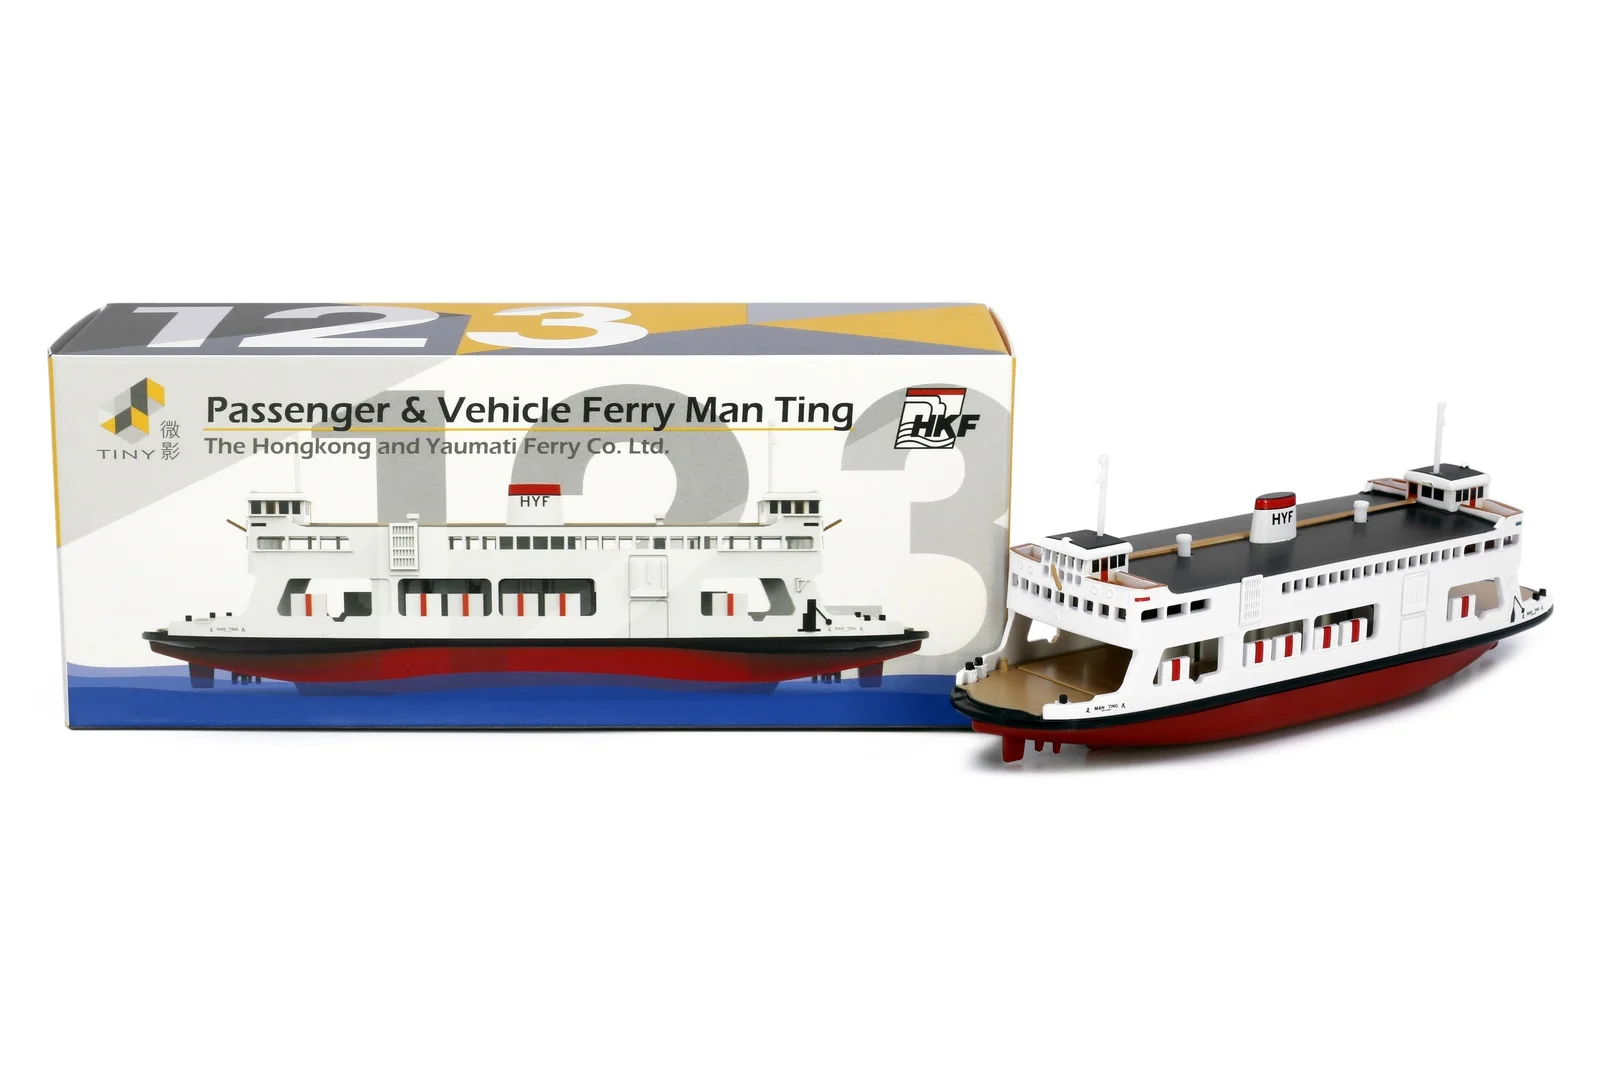 

HeyToys Tiny 1/400 123 Passenger & Vehicle Ferry Man Ting DieCast Model Ship Collection Limited